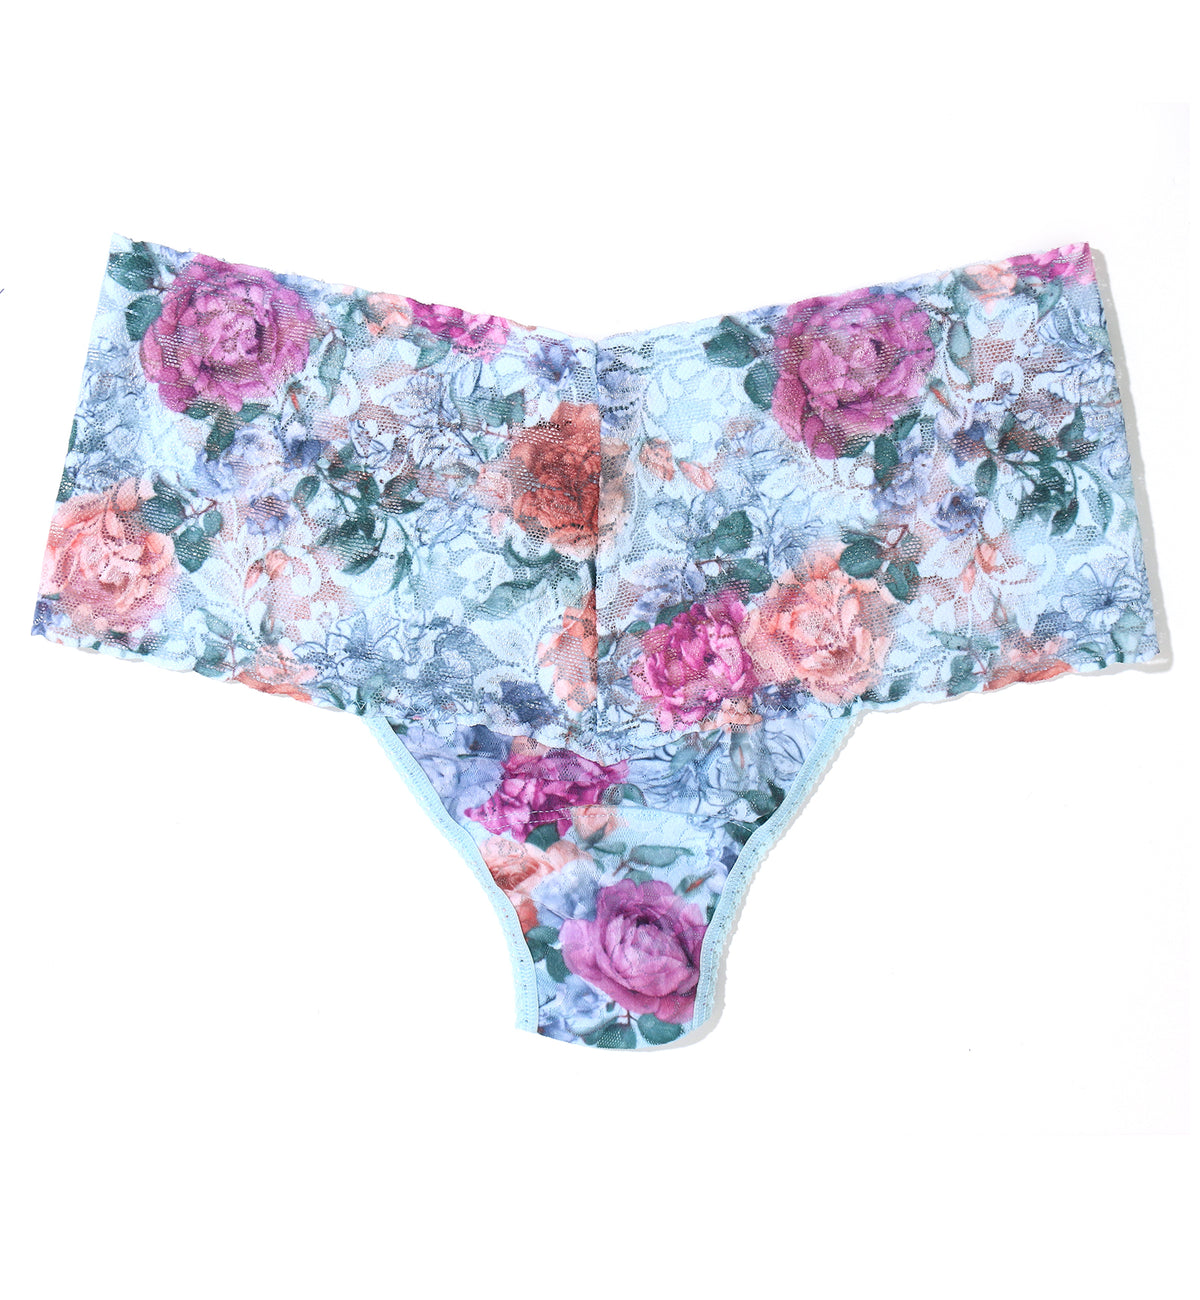 Hanky Panky High-Waist Retro Lace Printed Thong (PR9K1926),Tea for Two - Tea for Two,One Size